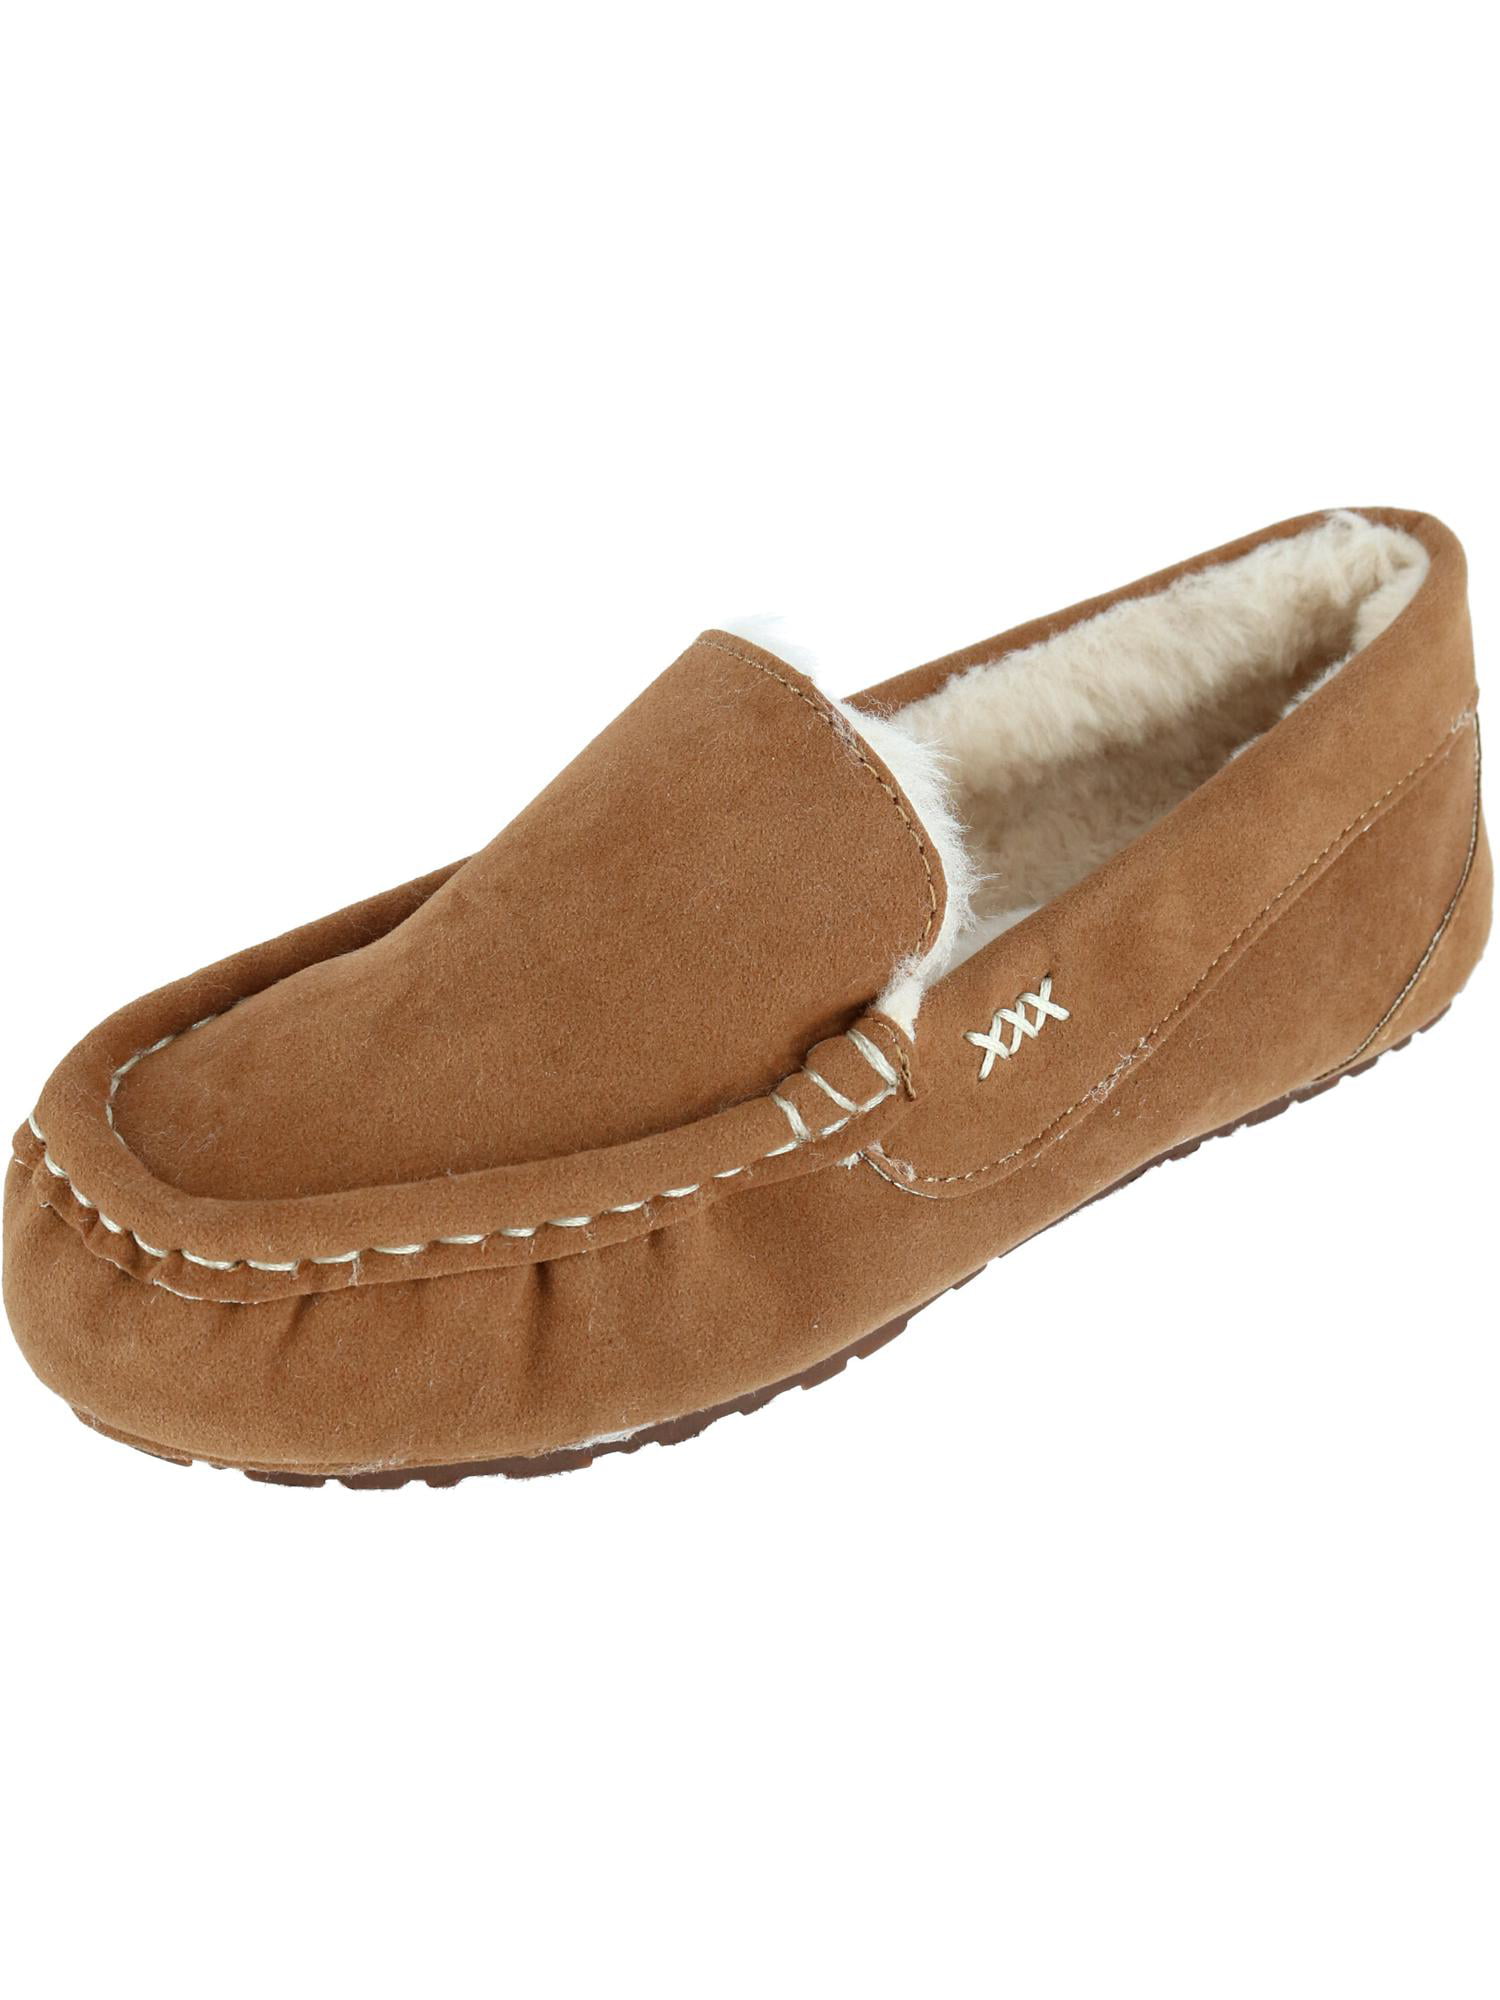 Toddler Boy's Girl's Suede Moccasin Loafers Slip on Flats Boat Shoes Soft Indoor Outdoor Slippers